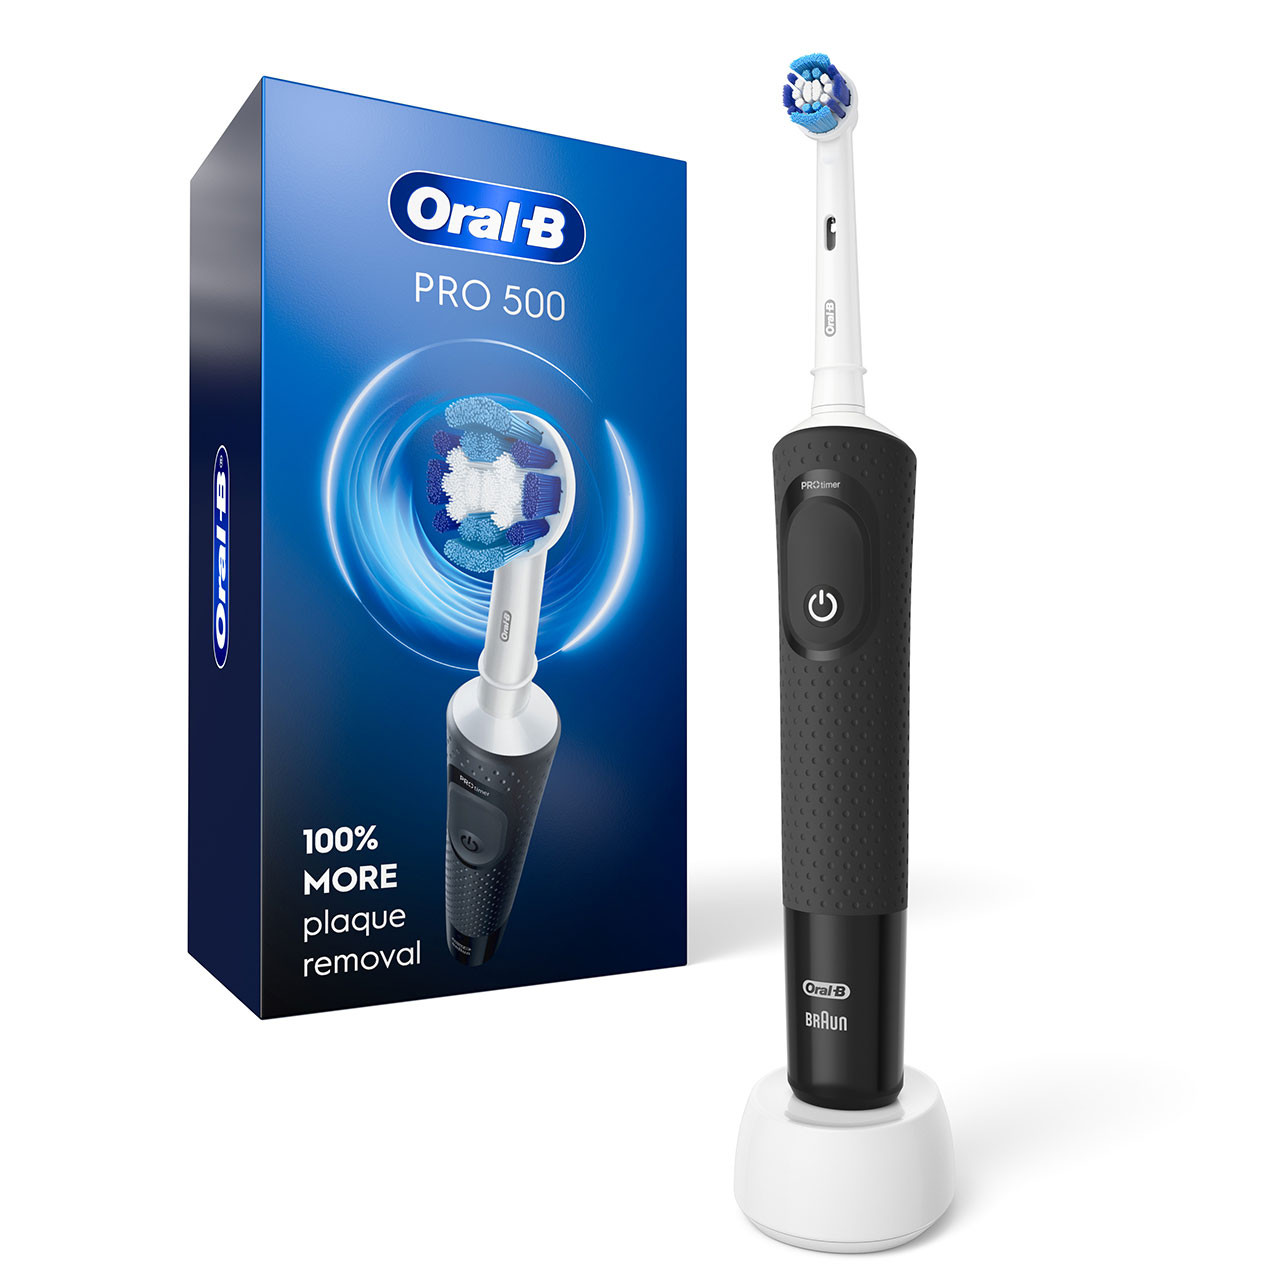 Oral-B Vitality Dual Clean Rechargeable Electric Toothbrush